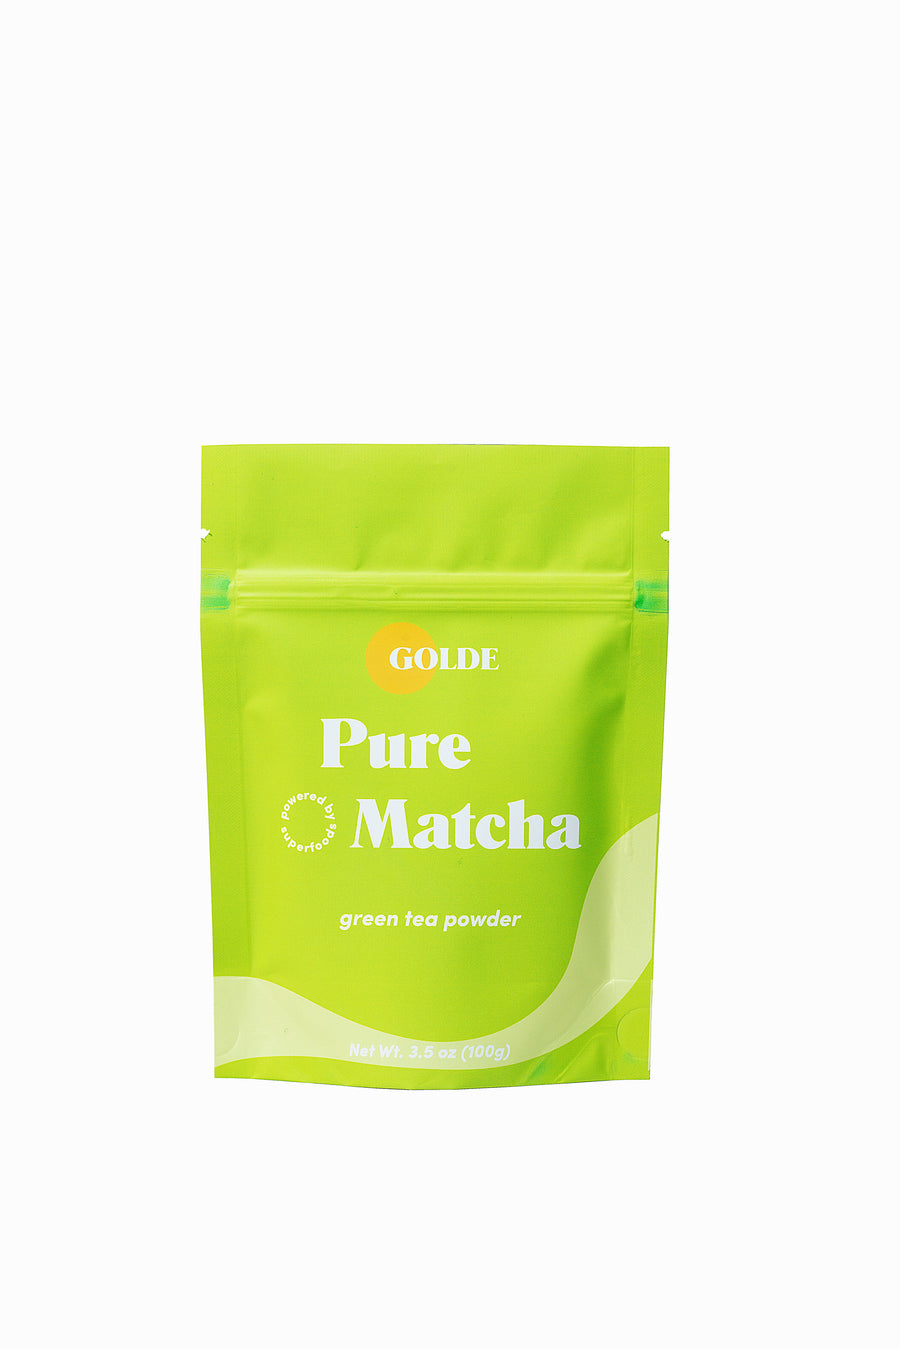 Pure Matcha 100g - Golde
2021 Holiday Gift Guide - 15 Gift Ideas for Everyone